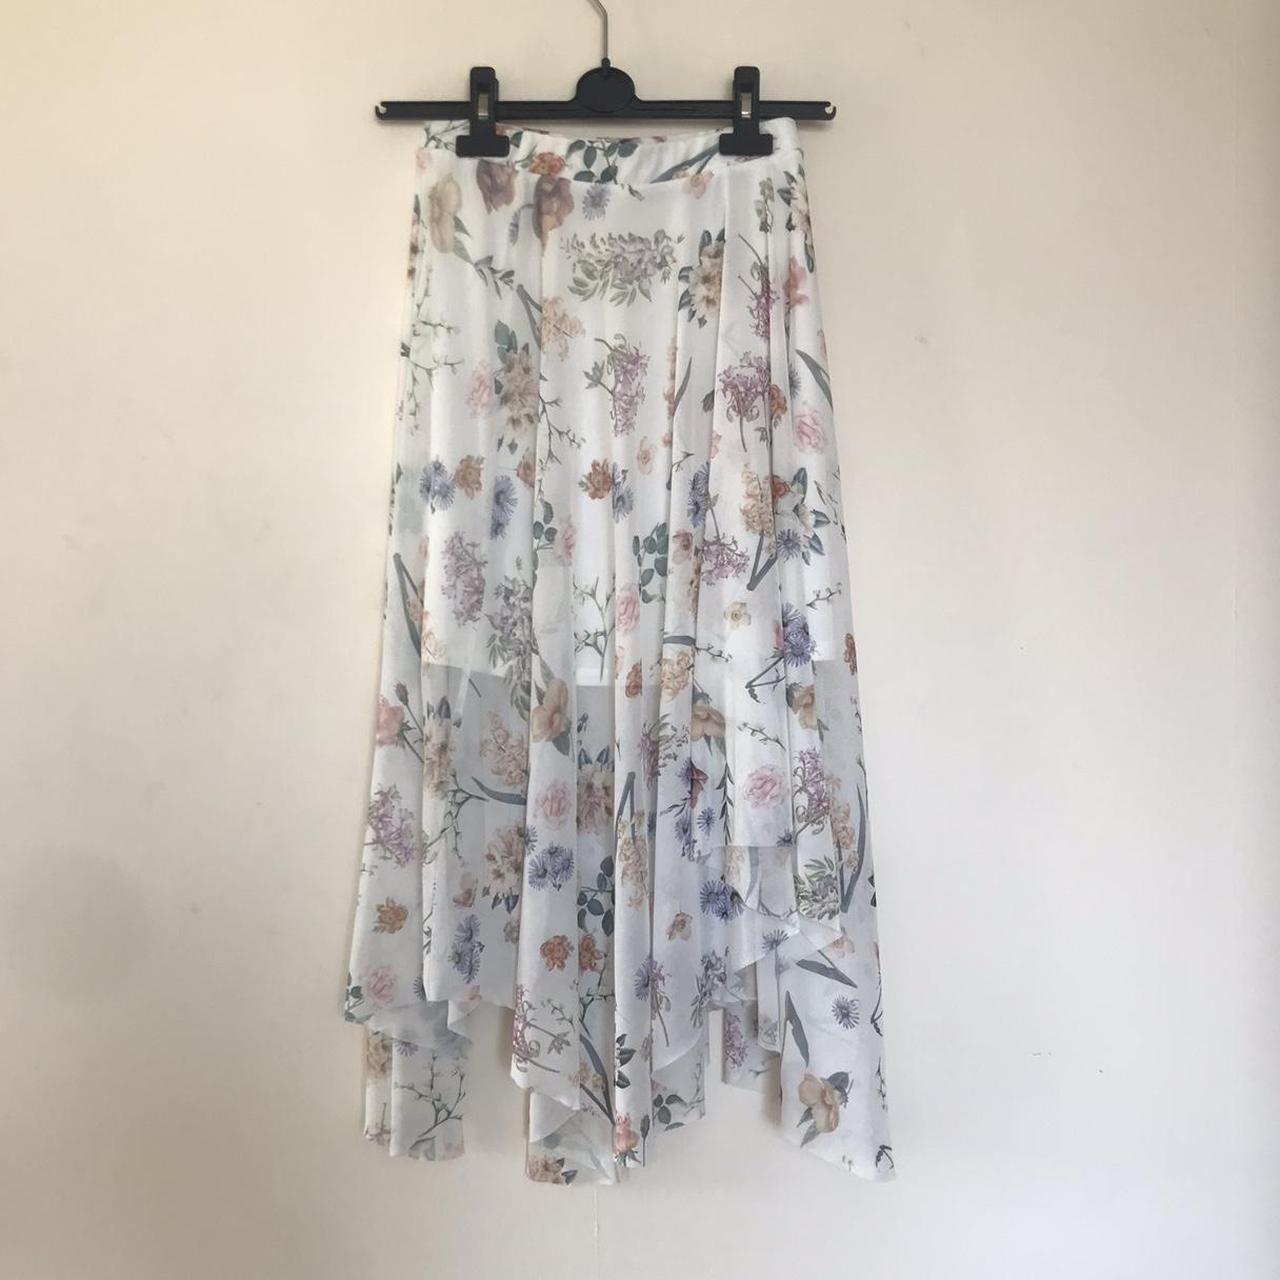 New look size 10 floaty skirt with underskirt. Has... - Depop